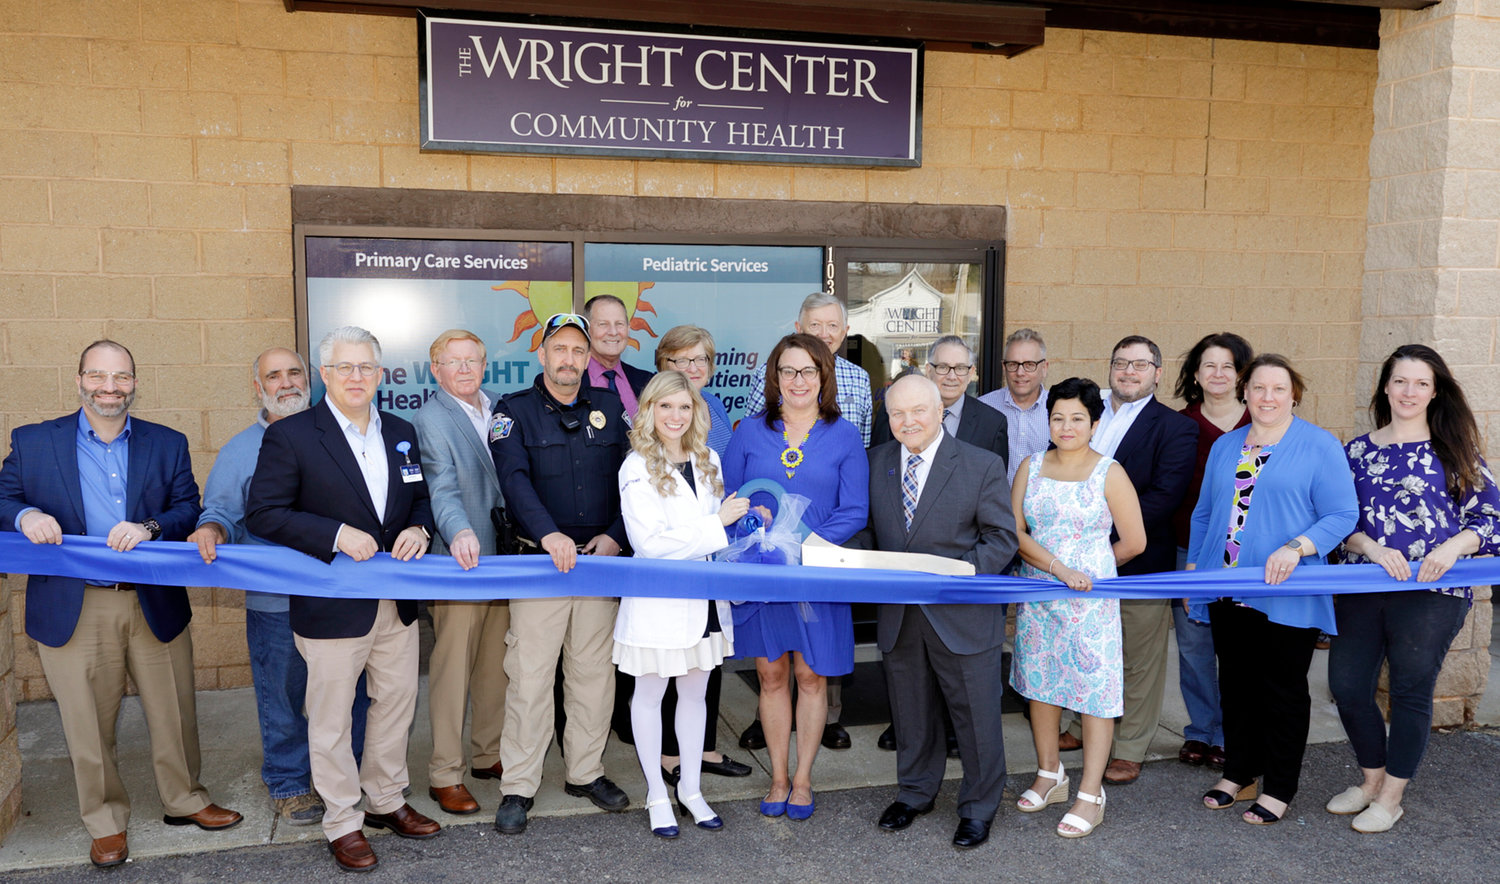 The Wright Center for Community Health cut a ceremonial ribbon on April 24, marking the opening of its new North Pocono practice...